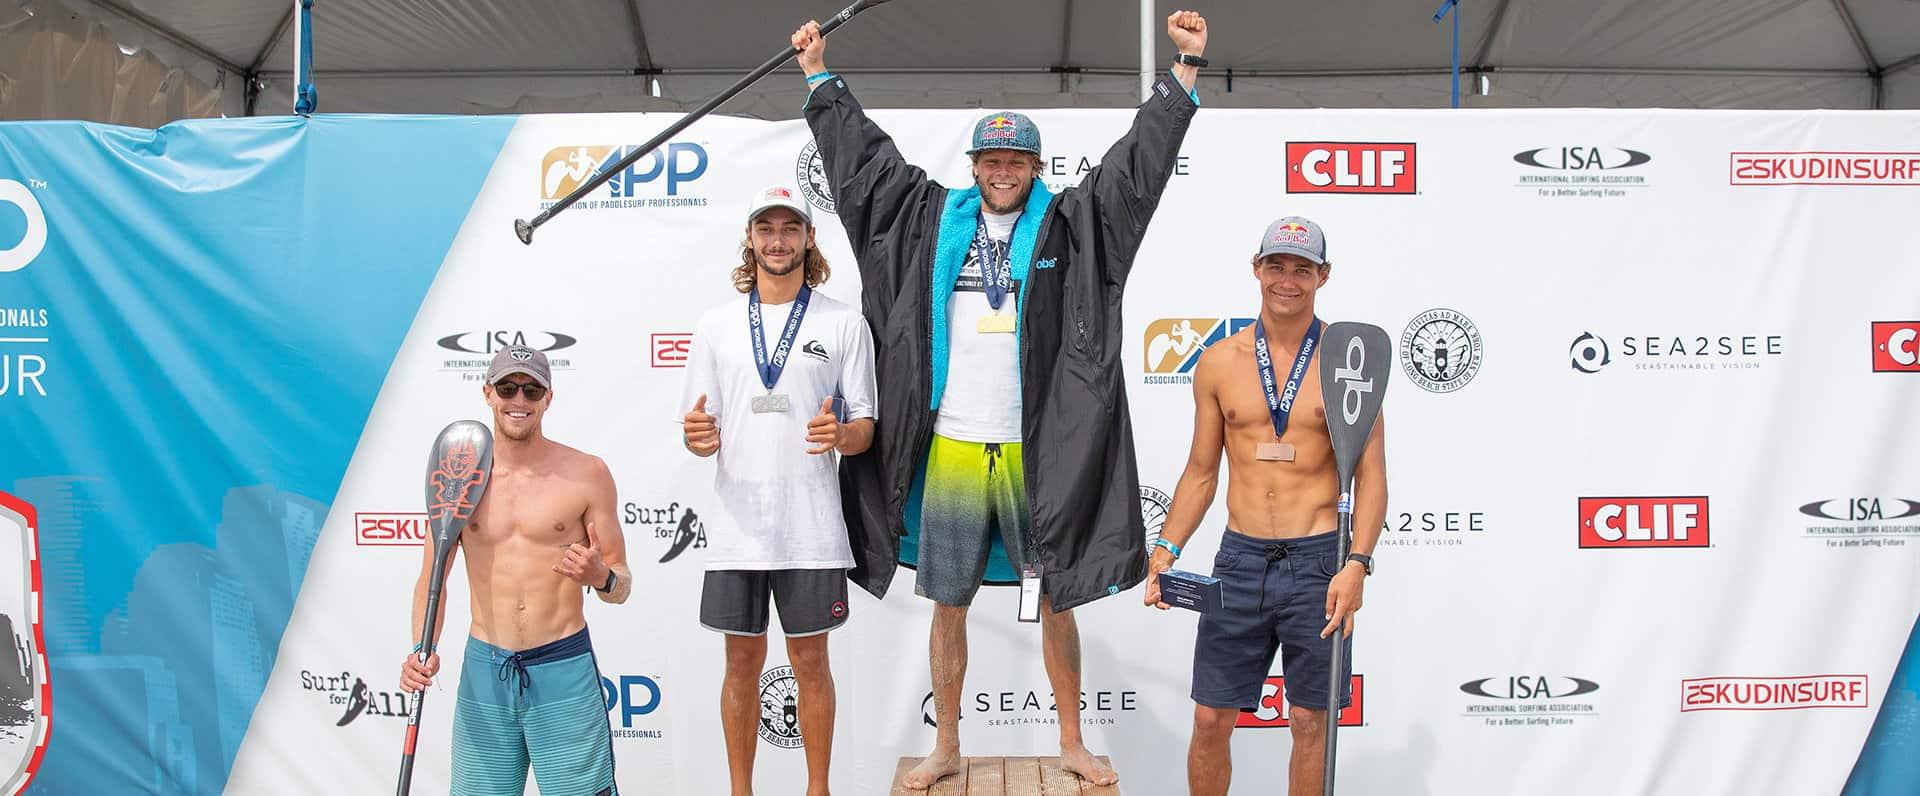 Casper Steinfath Takes Sprint Race Champion Title at NY SUP Open on his Birthday - Naish.com